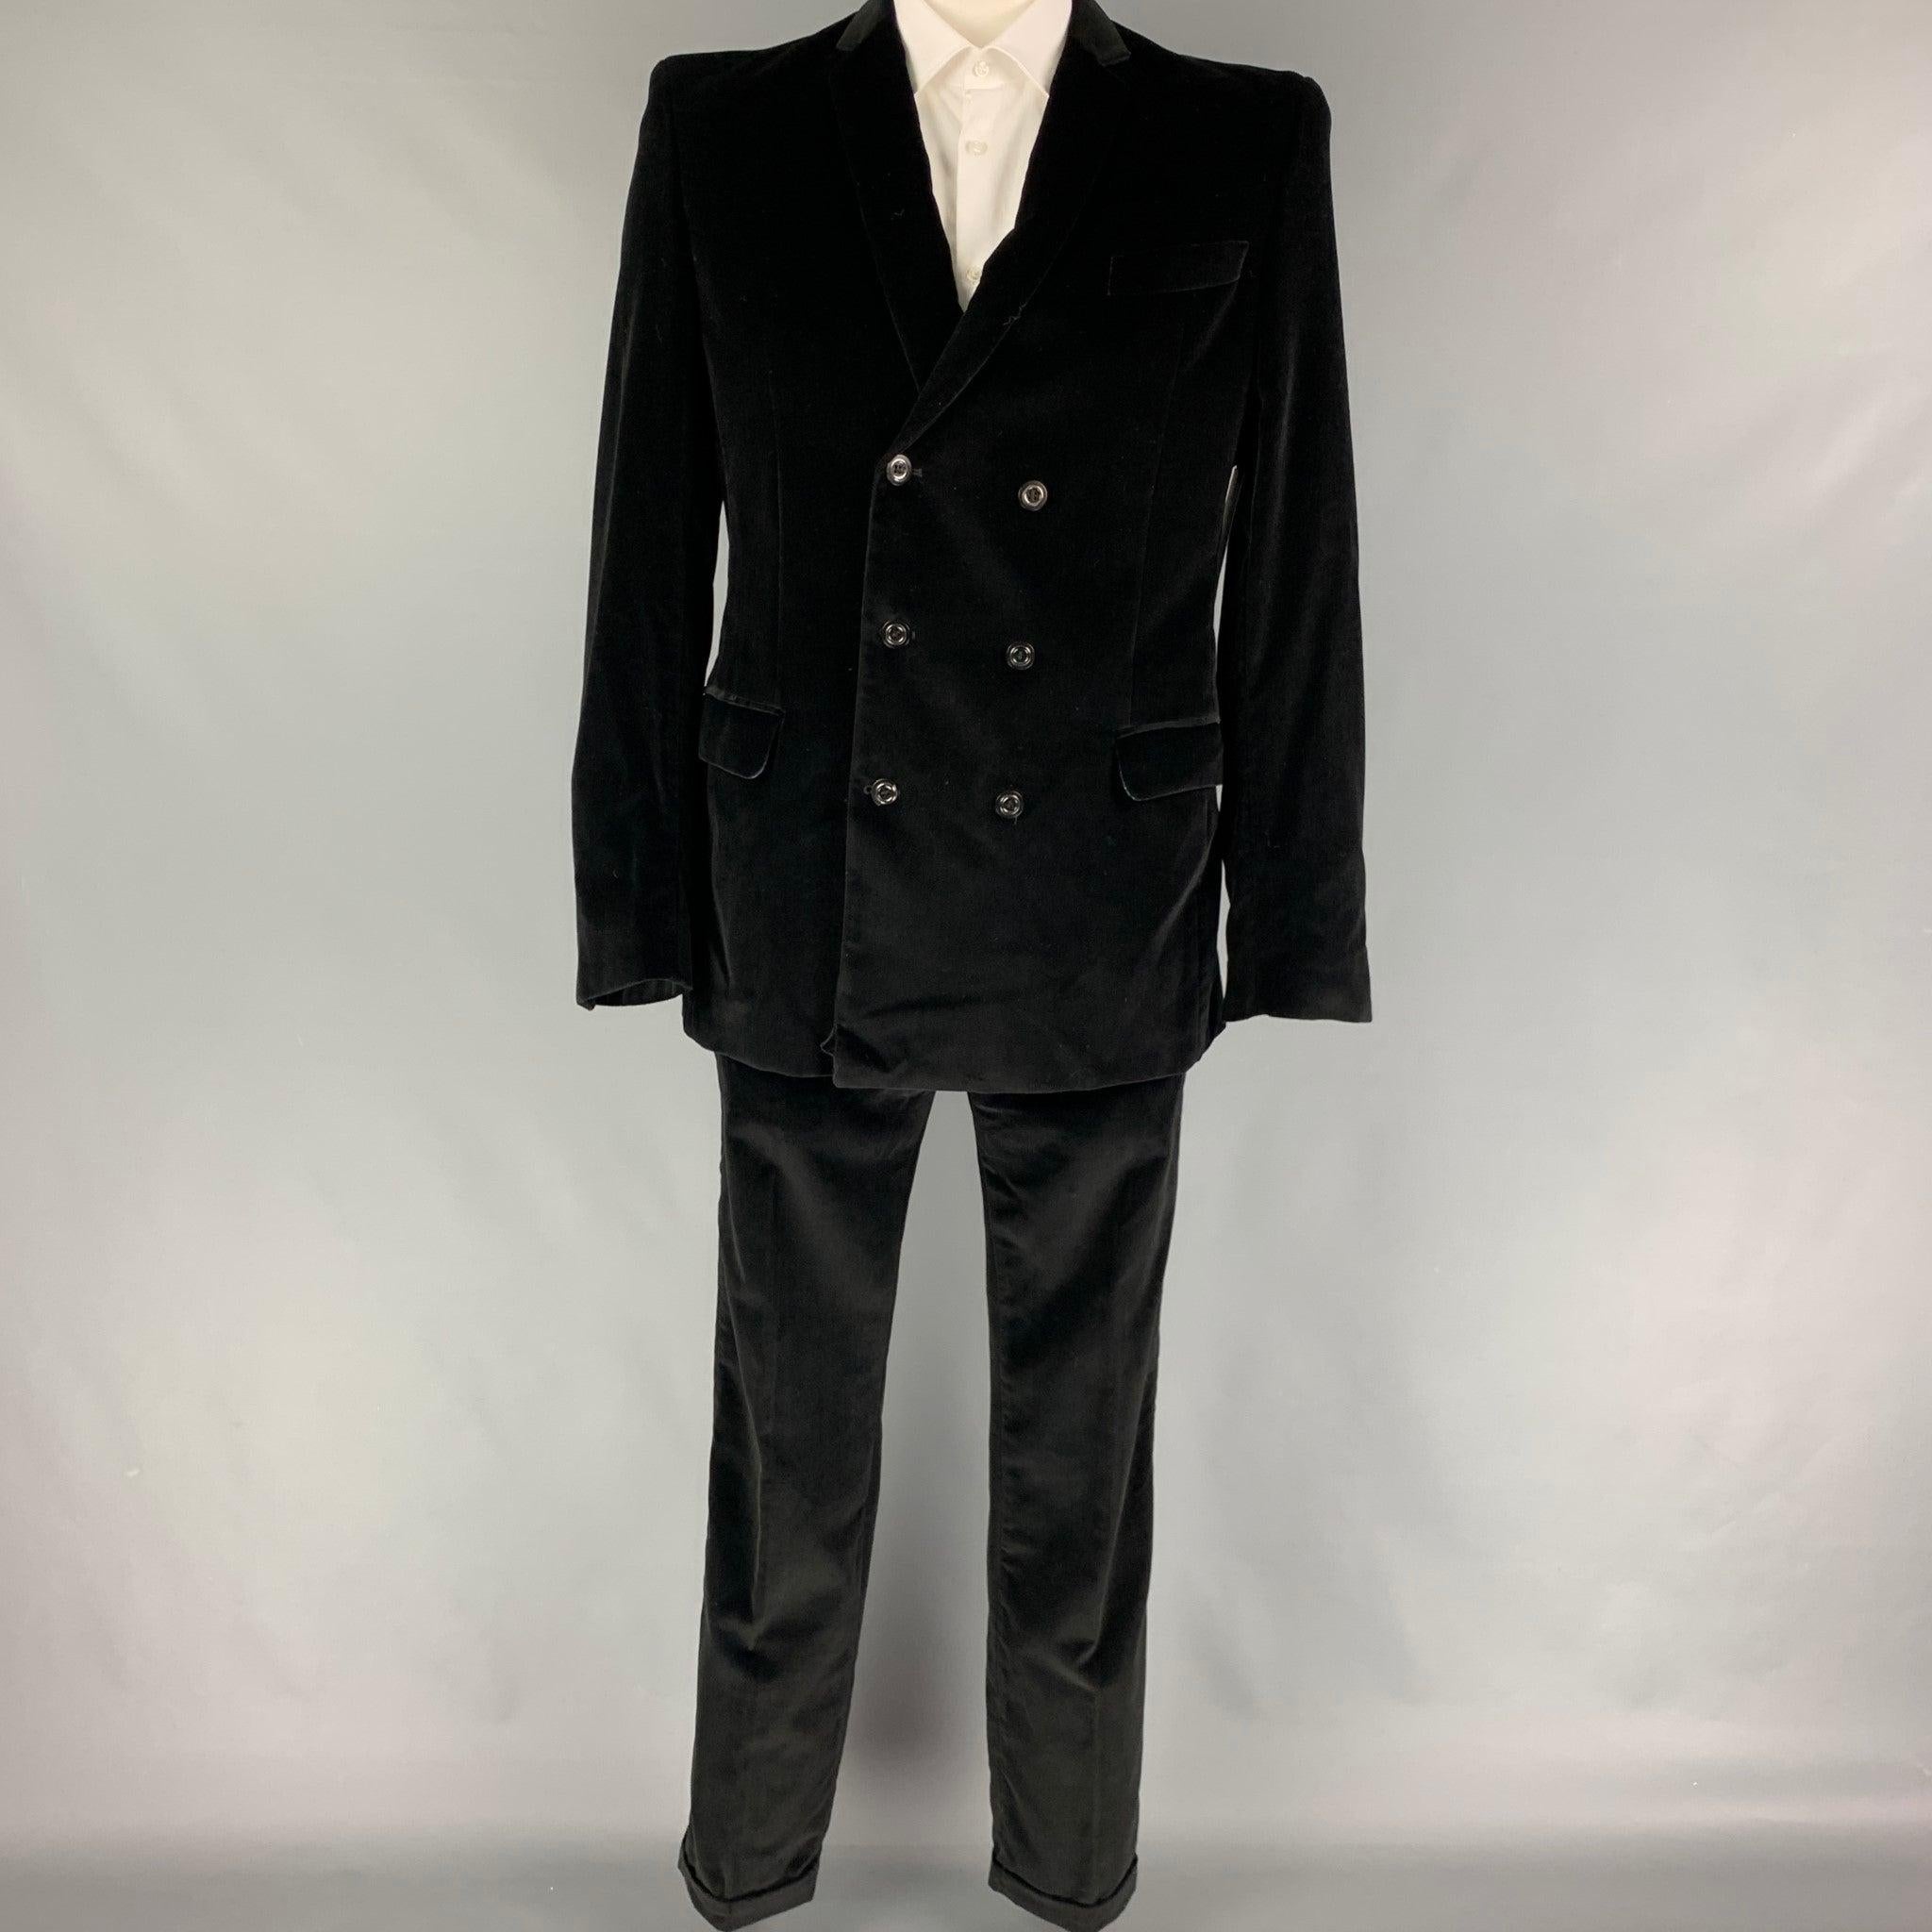 JUST CAVALLI
suit comes in a black velvet cotton with a full liner and includes a double breasted sport coat with a notch lapel and matching flat front trousers. Made in Italy. Very Good Pre-Owned Condition. 

Marked:   54 

Measurements: 
 